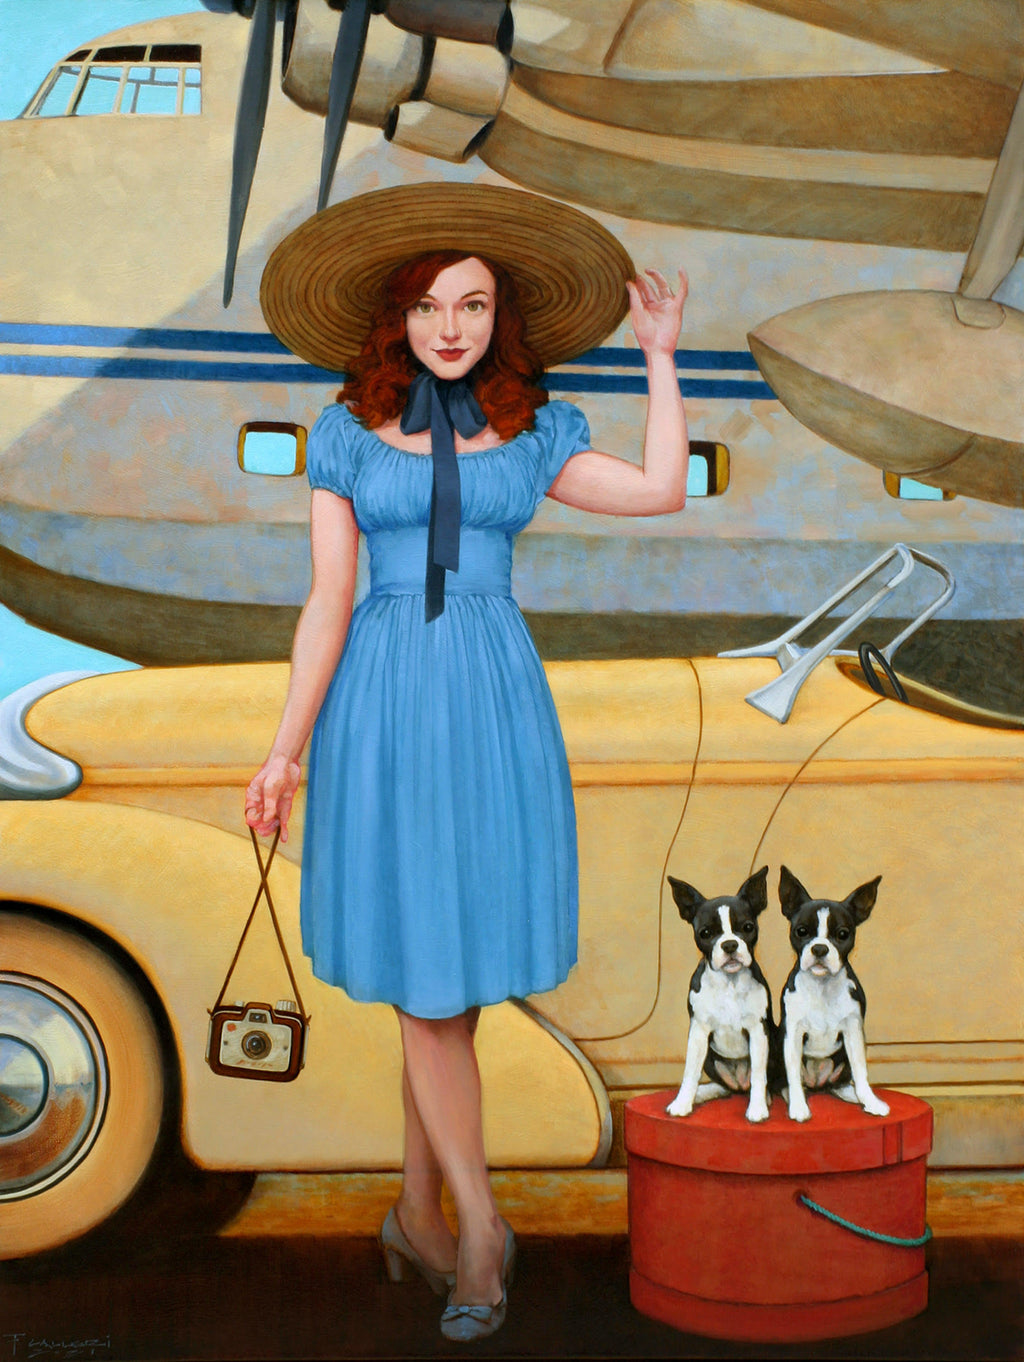 Oil on canvas painting of a woman in blue dress with a wide brimmed straw hat standing in front of a car and an airplane with a red hat box on which sit two black and white dogs